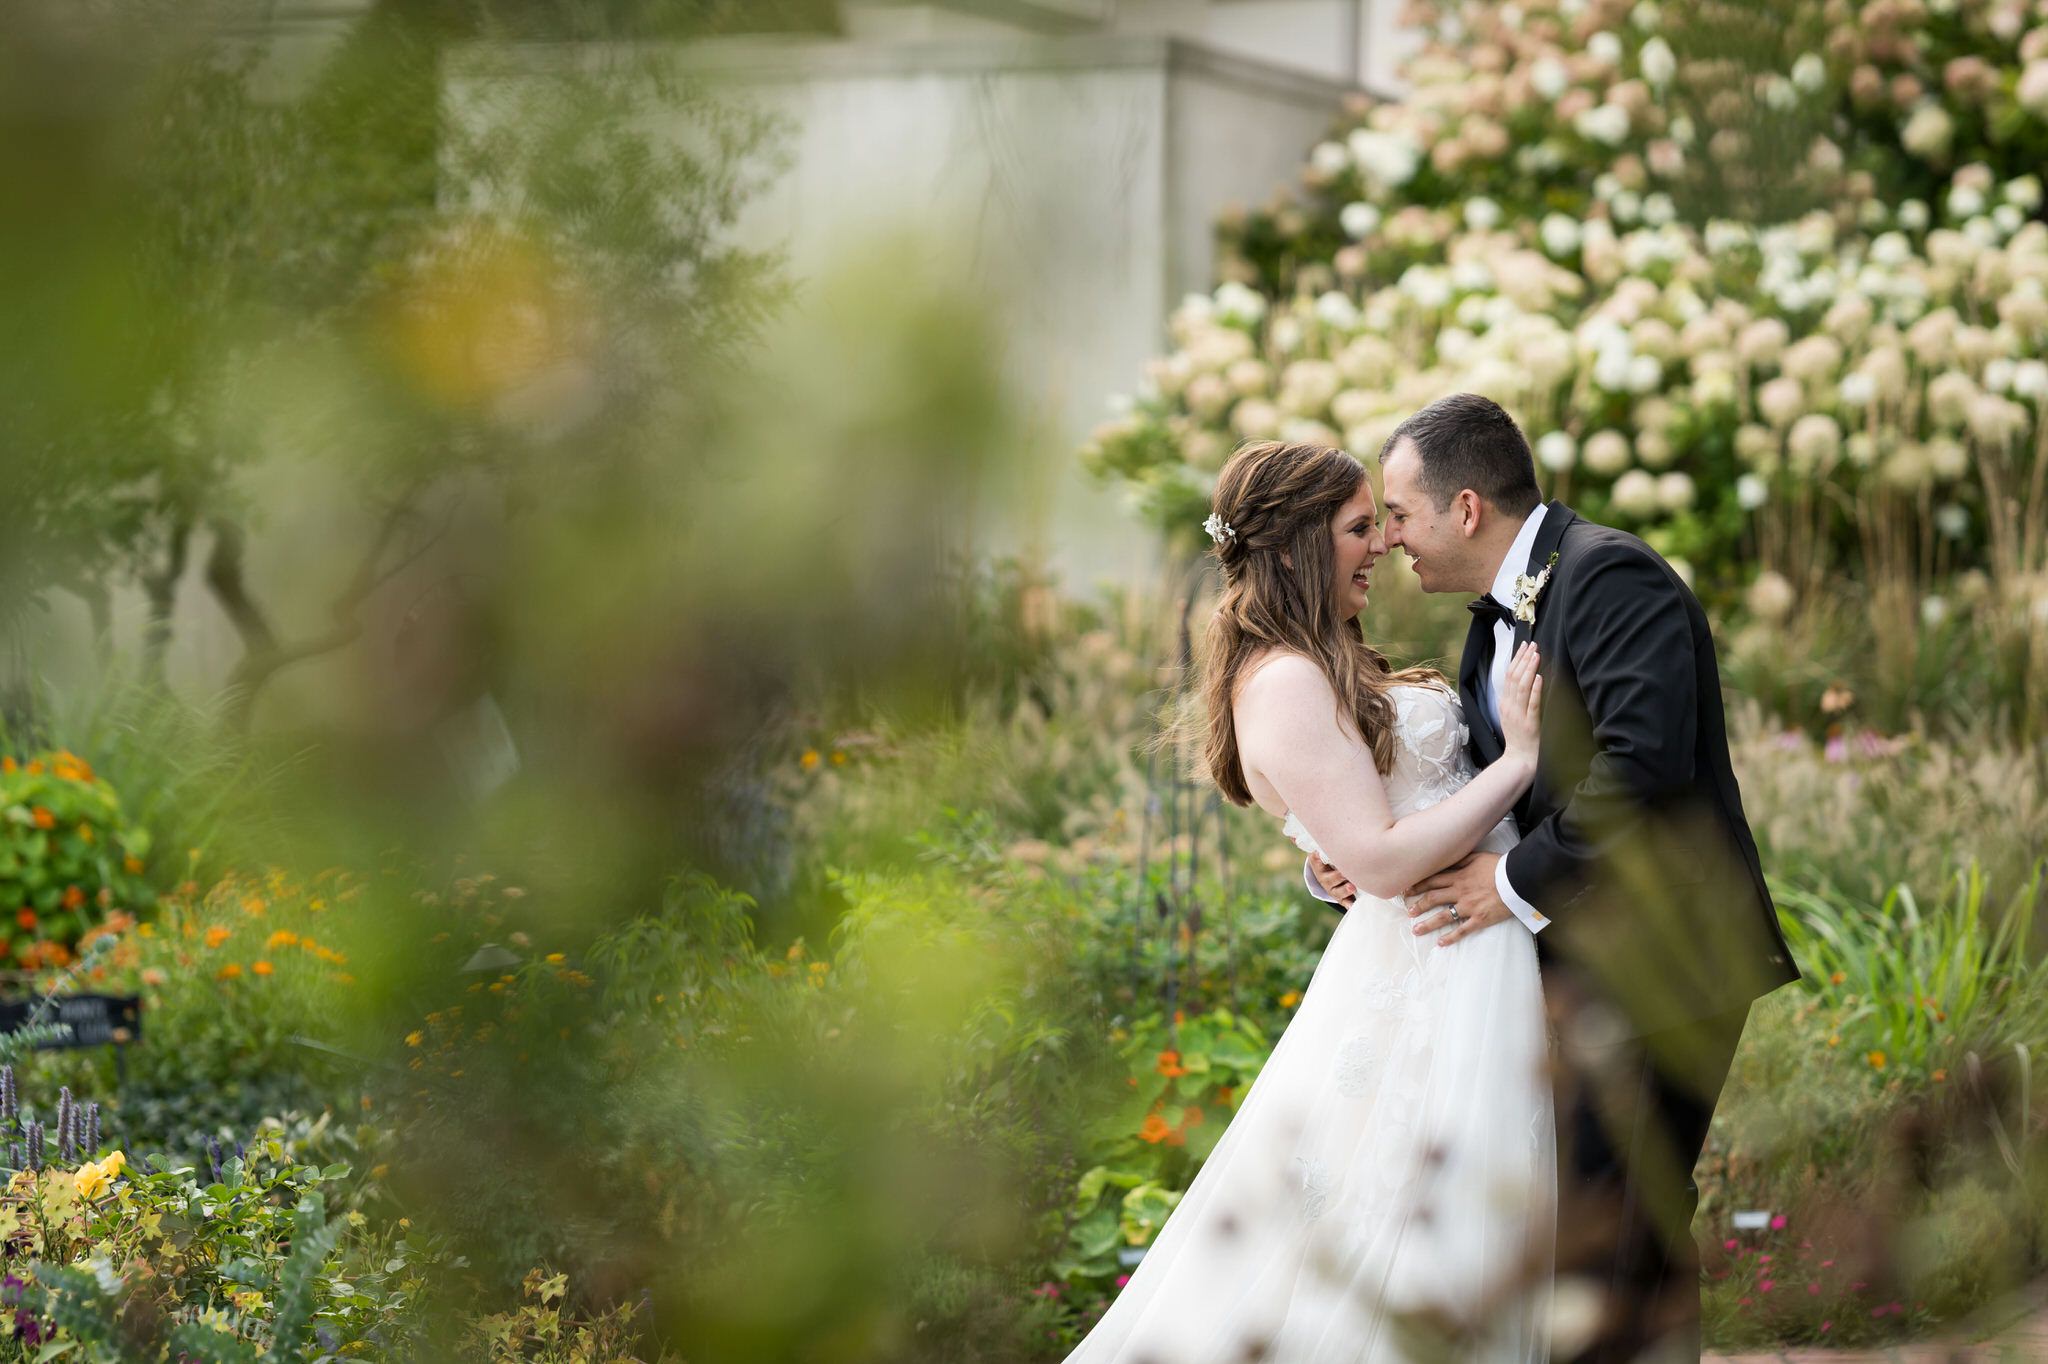 The bride and groom  are photographed in the gardens during their wedding at The War Memorial.  